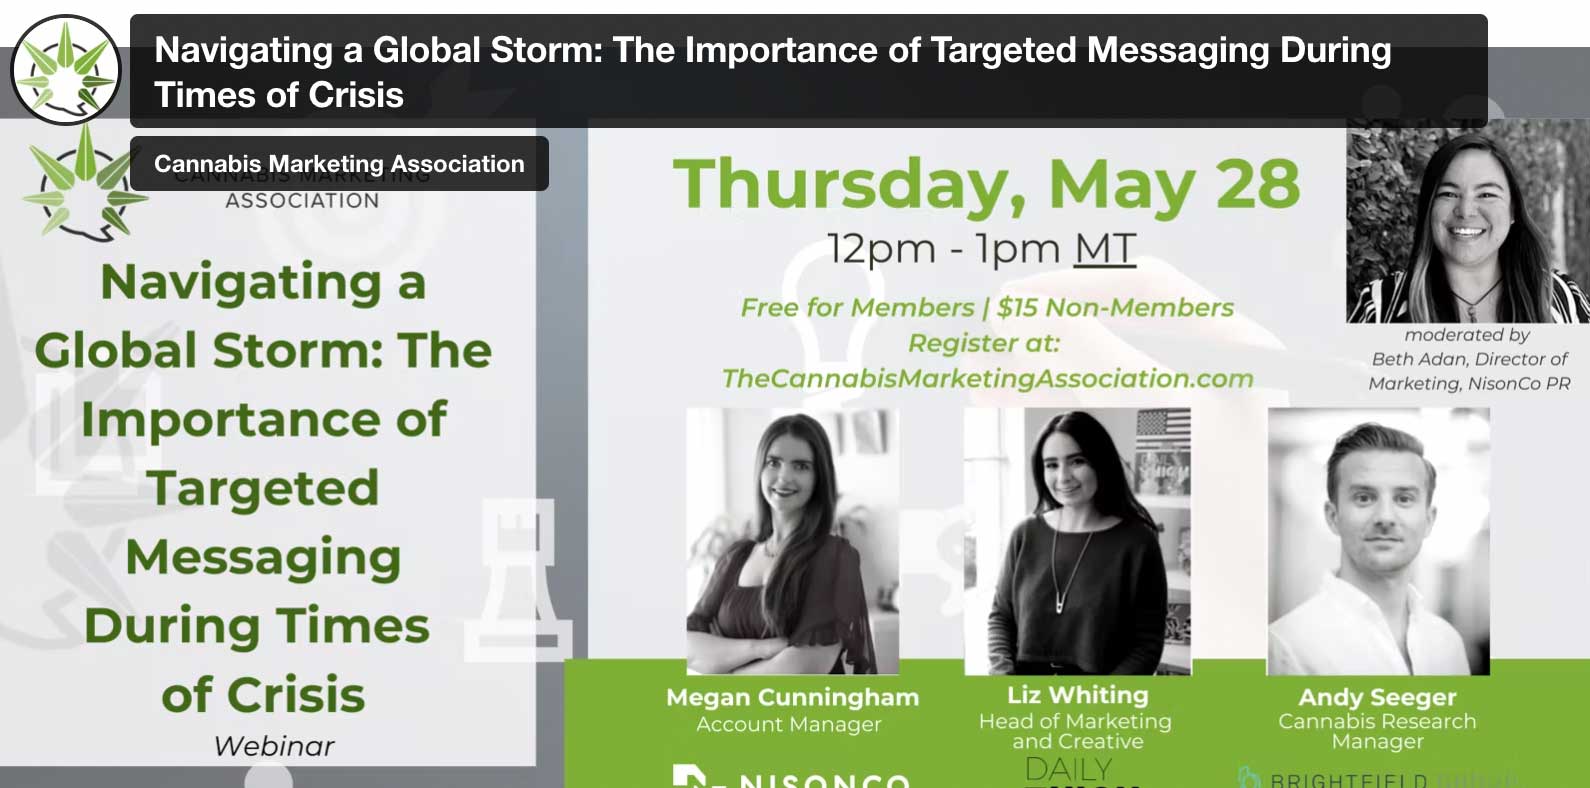 CMA: Navigating a Global Storm: The Importance of Targeted Messaging During Times of Crisis